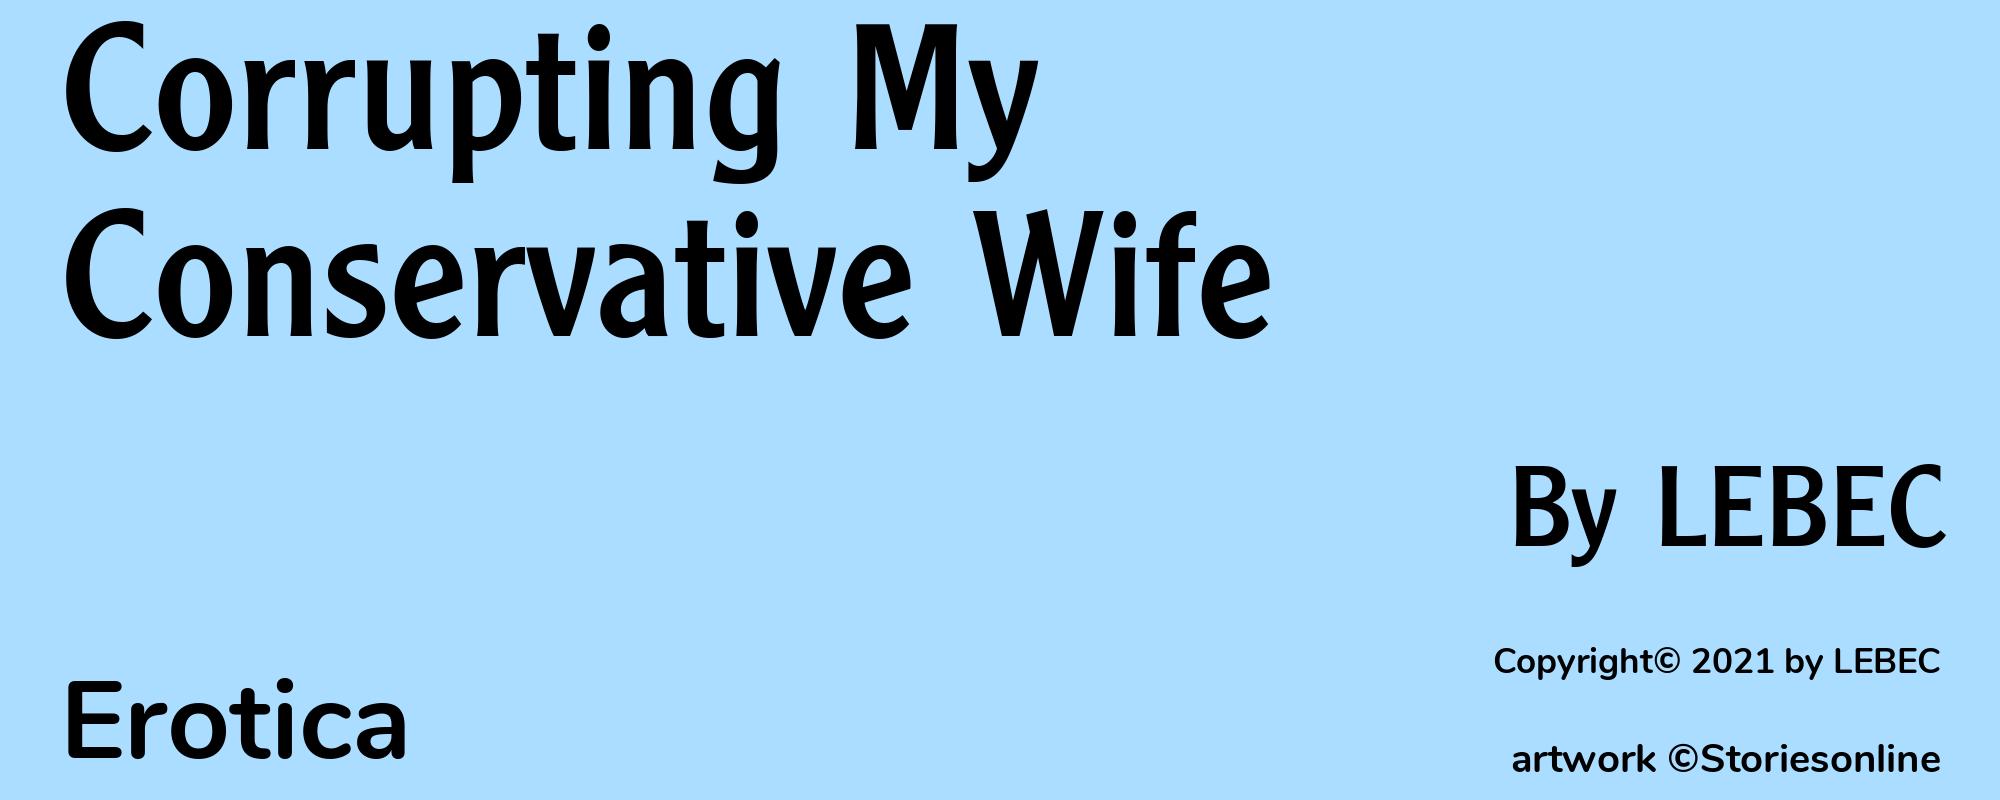 Corrupting My Conservative Wife - Cover